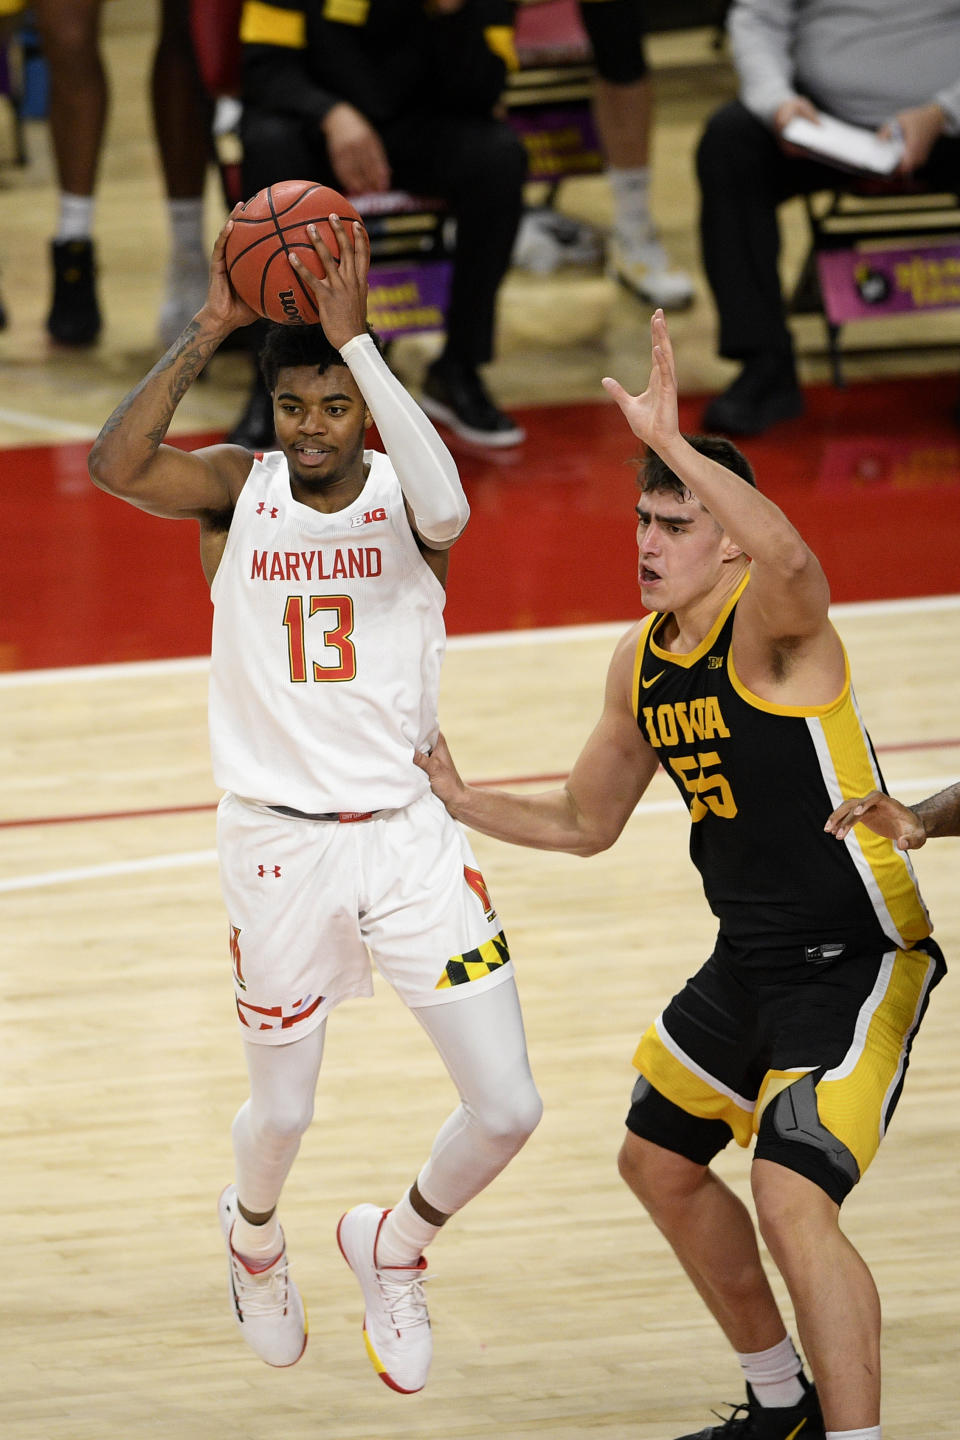 Maryland guard Hakim Hart (13) looks to pass next to Iowa center Luka Garza (55) during the first half of an NCAA college basketball game, Thursday, Jan. 7, 2021, in College Park, Md. (AP Photo/Nick Wass)